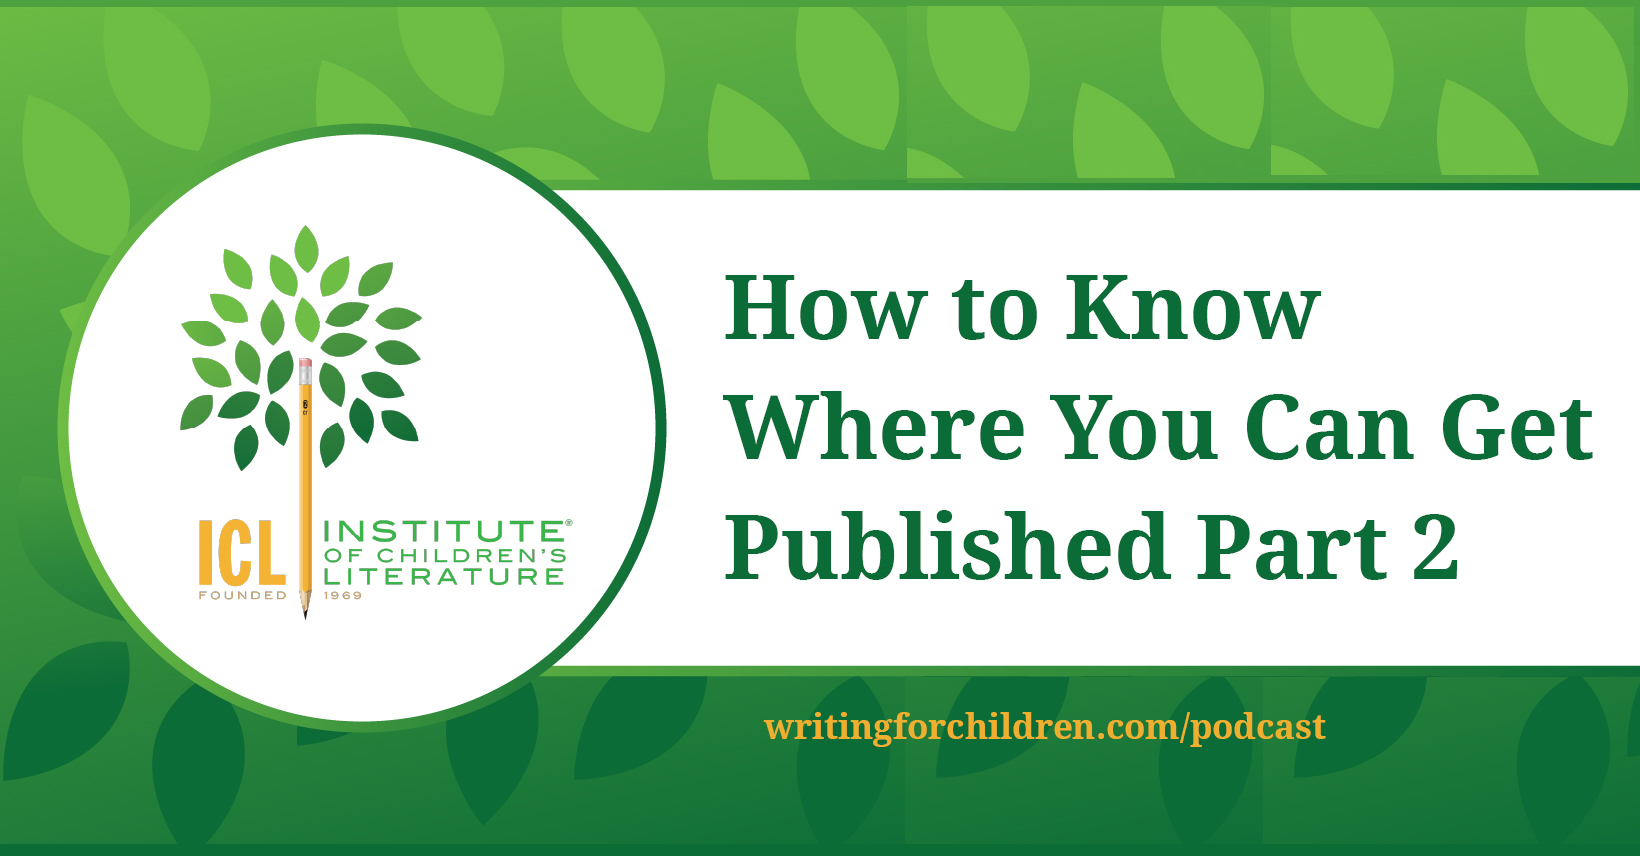 How-to-Know-Where-You-Can-Get-Published-Part-2-episode-78